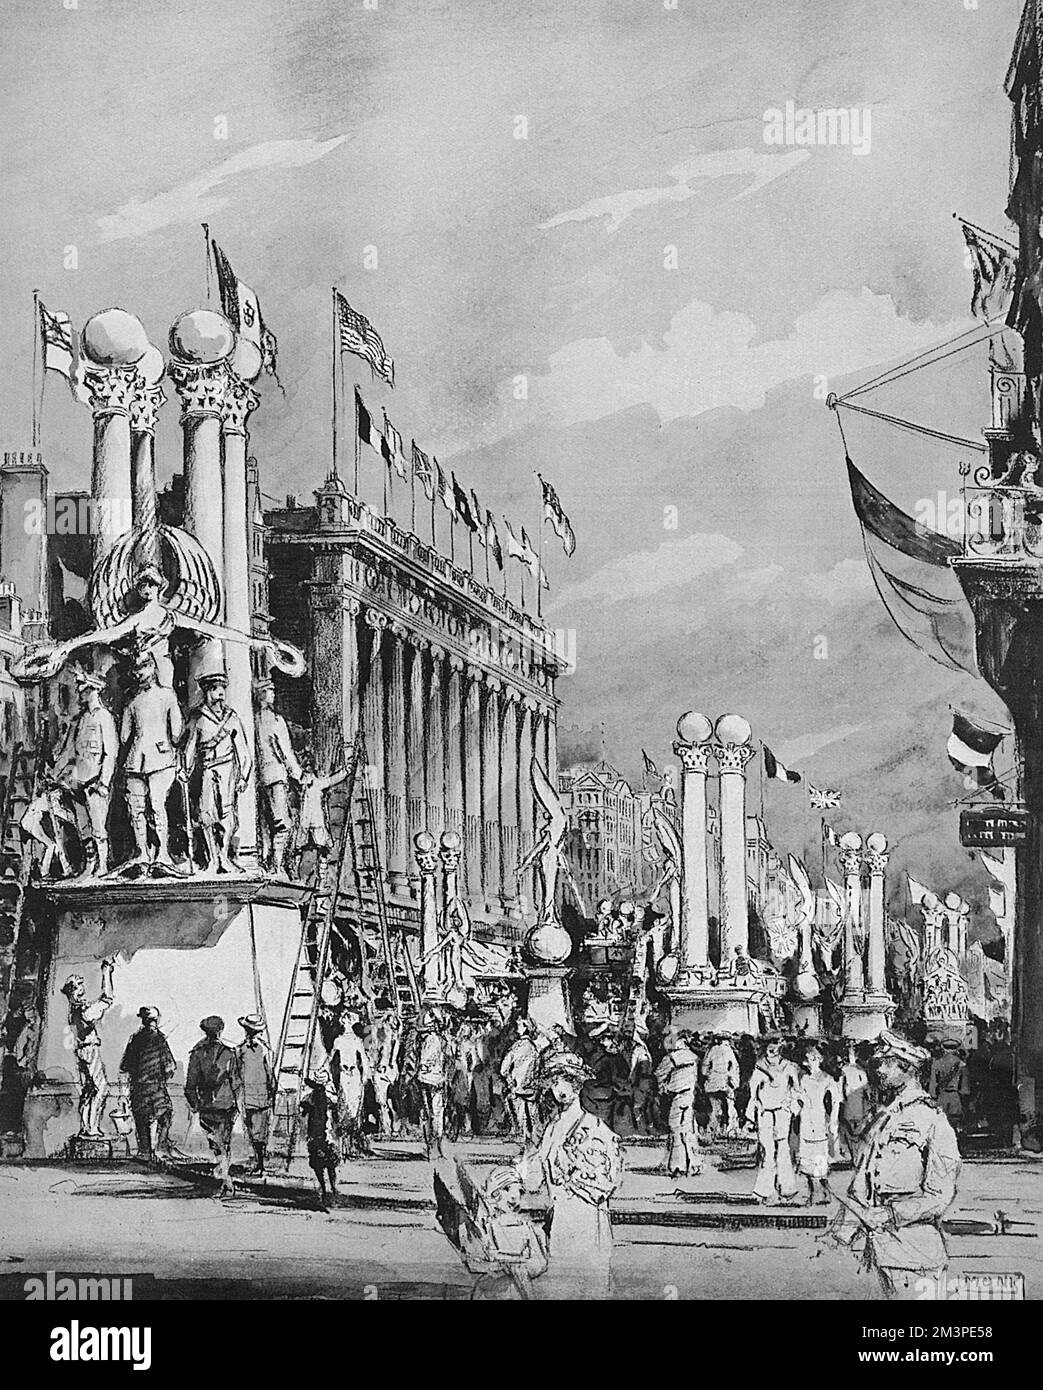 Symbolic display of temporary martial statues in Oxford Street outside Selfridge's department store, part of the street decorations in London for the Peace Day celebrations and procession following the signing of the Treaty of Versailles.       Date: 1919 Stock Photo